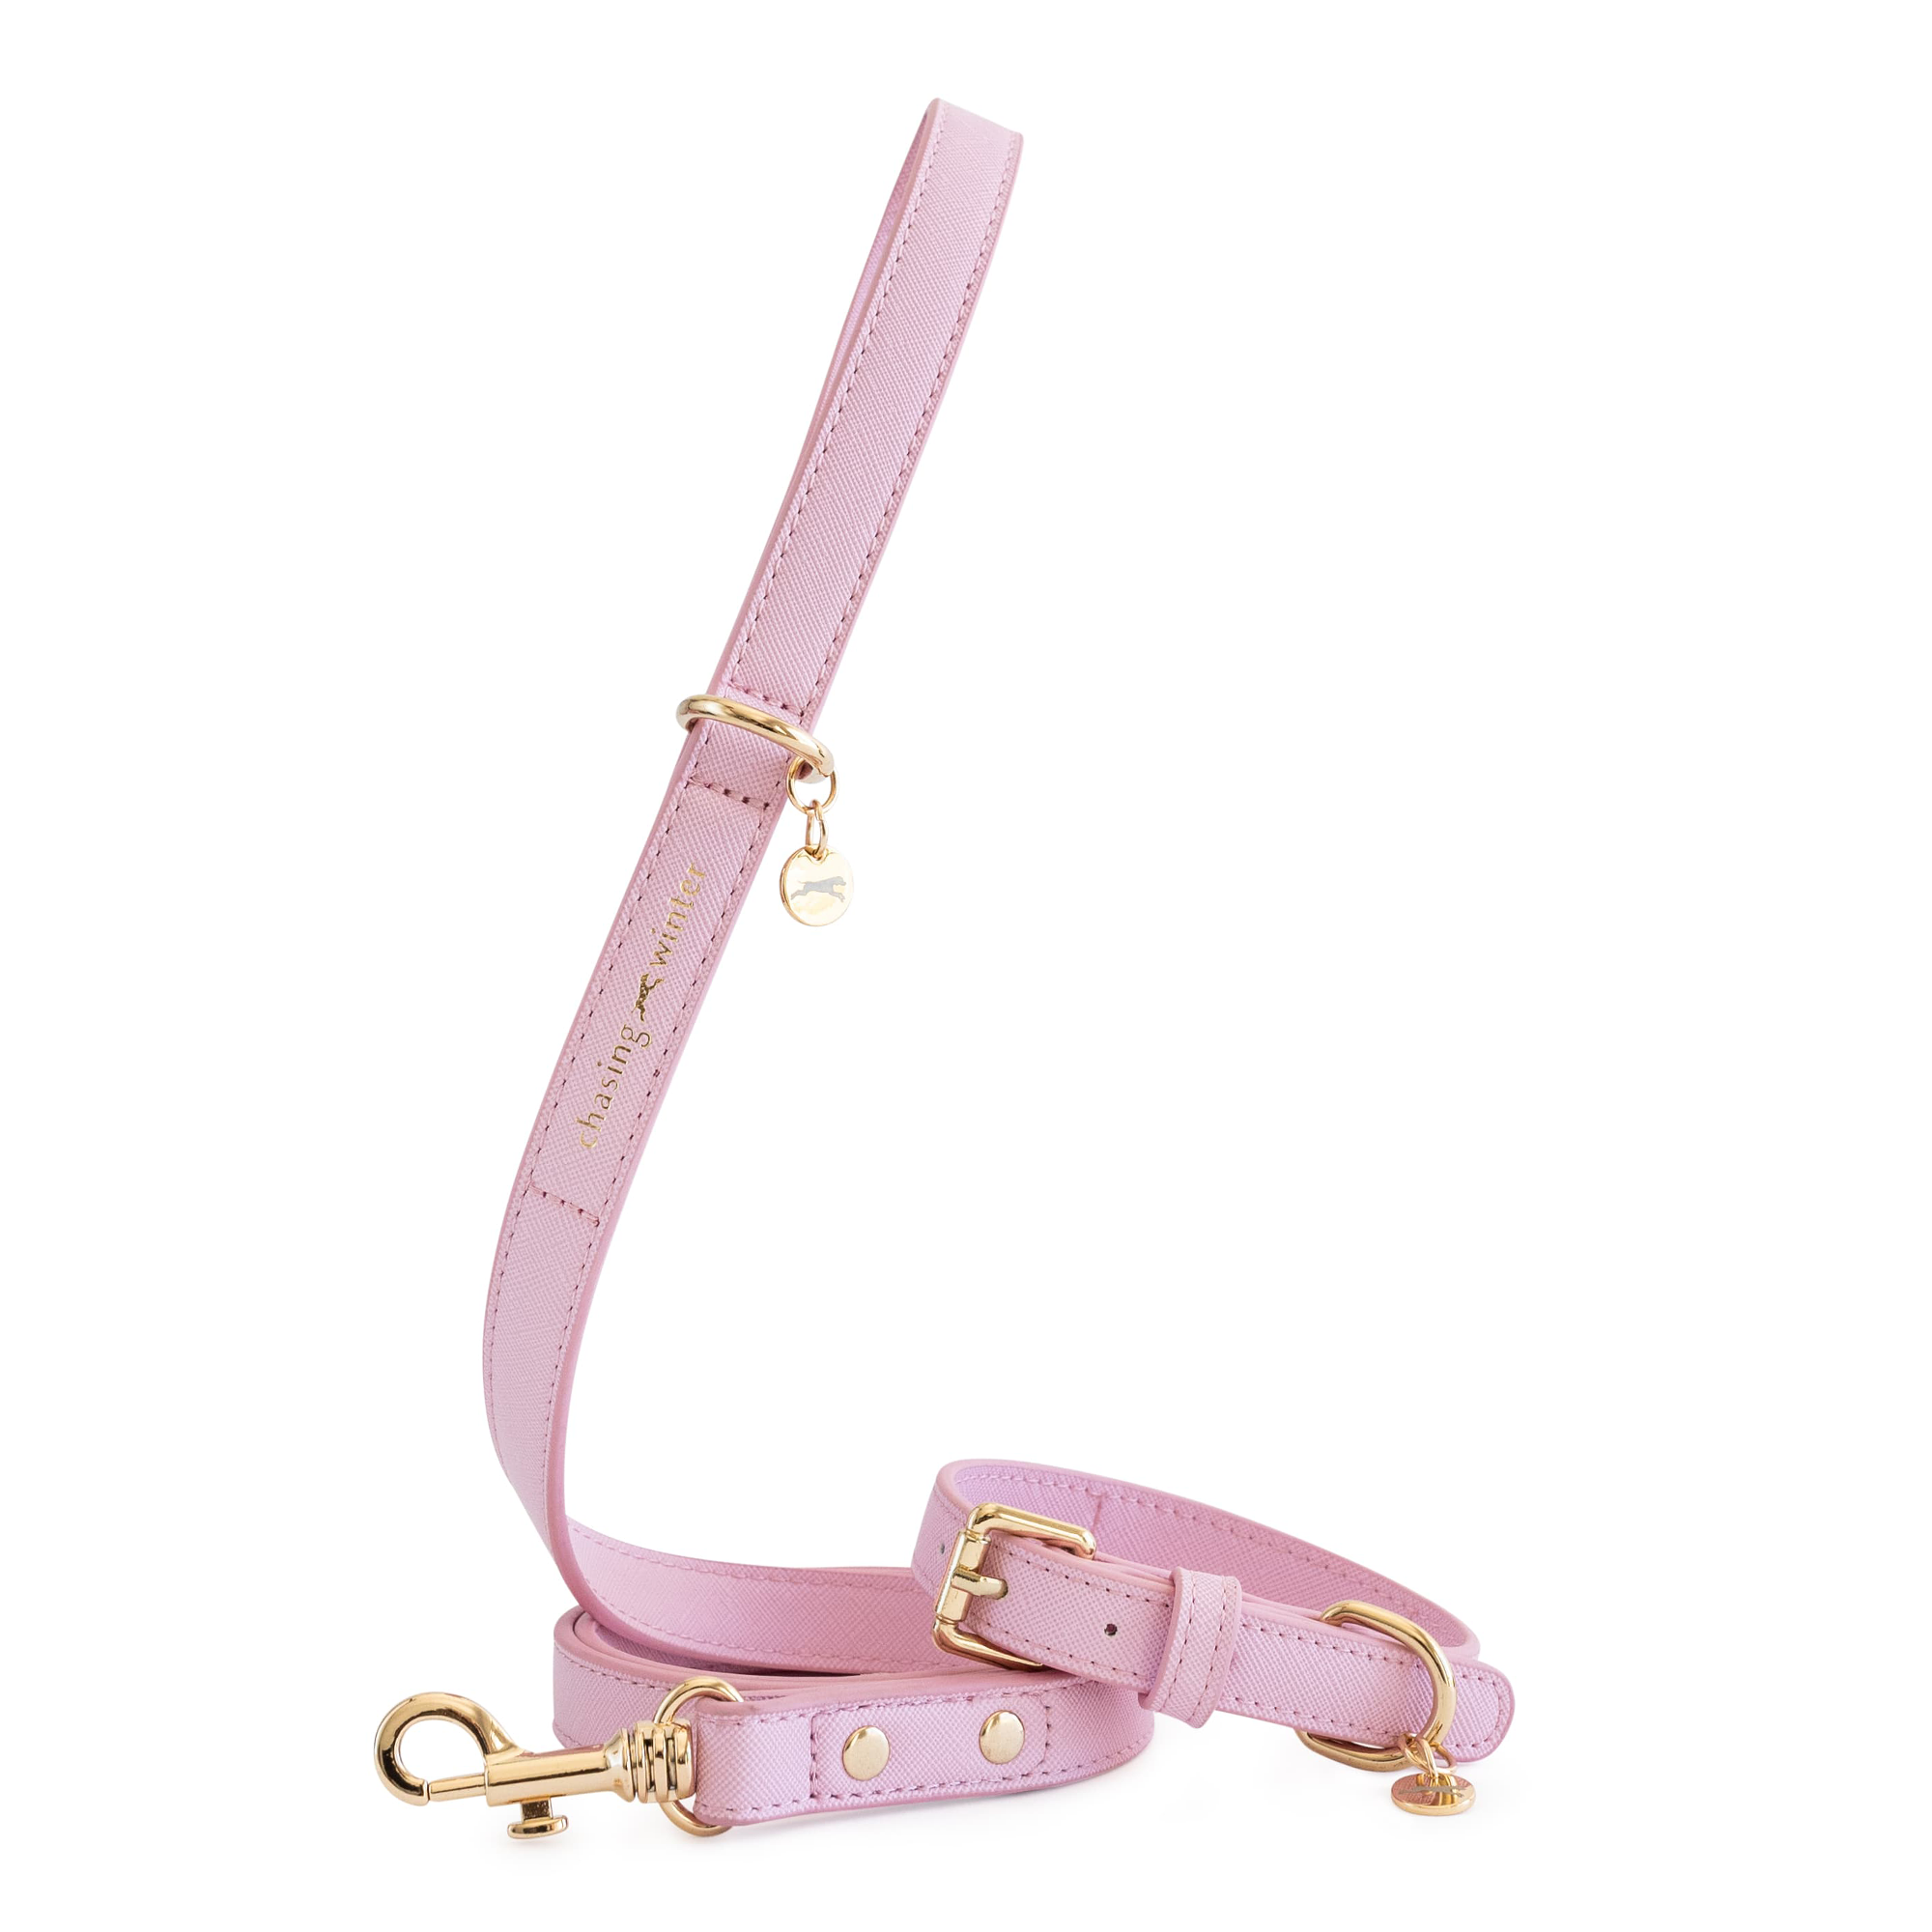 pink dog collar and lead bundle - chasing winter